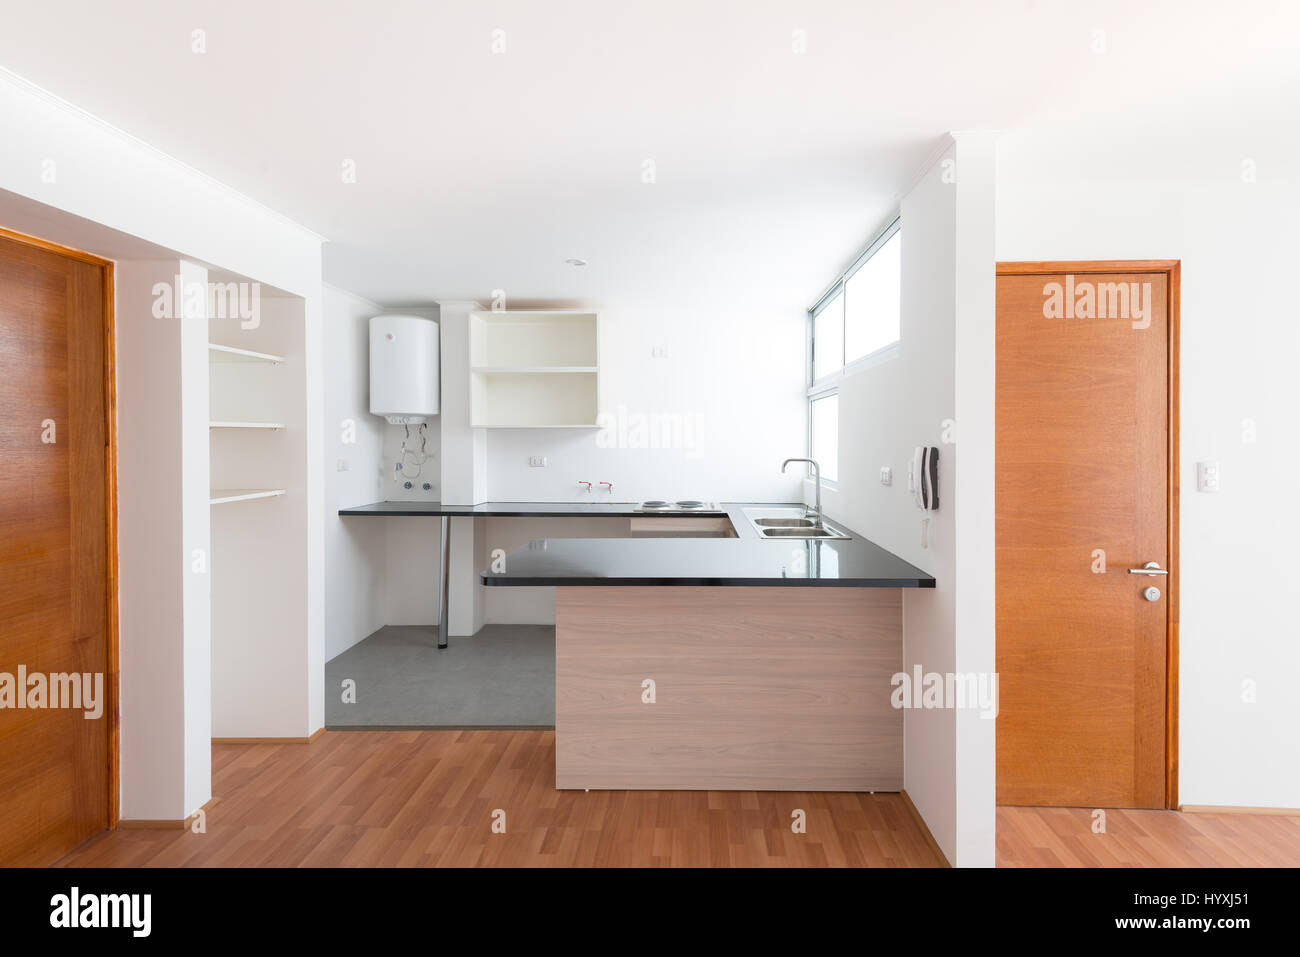 Kitchen of a small one bedroom empty apartment Stock Photo